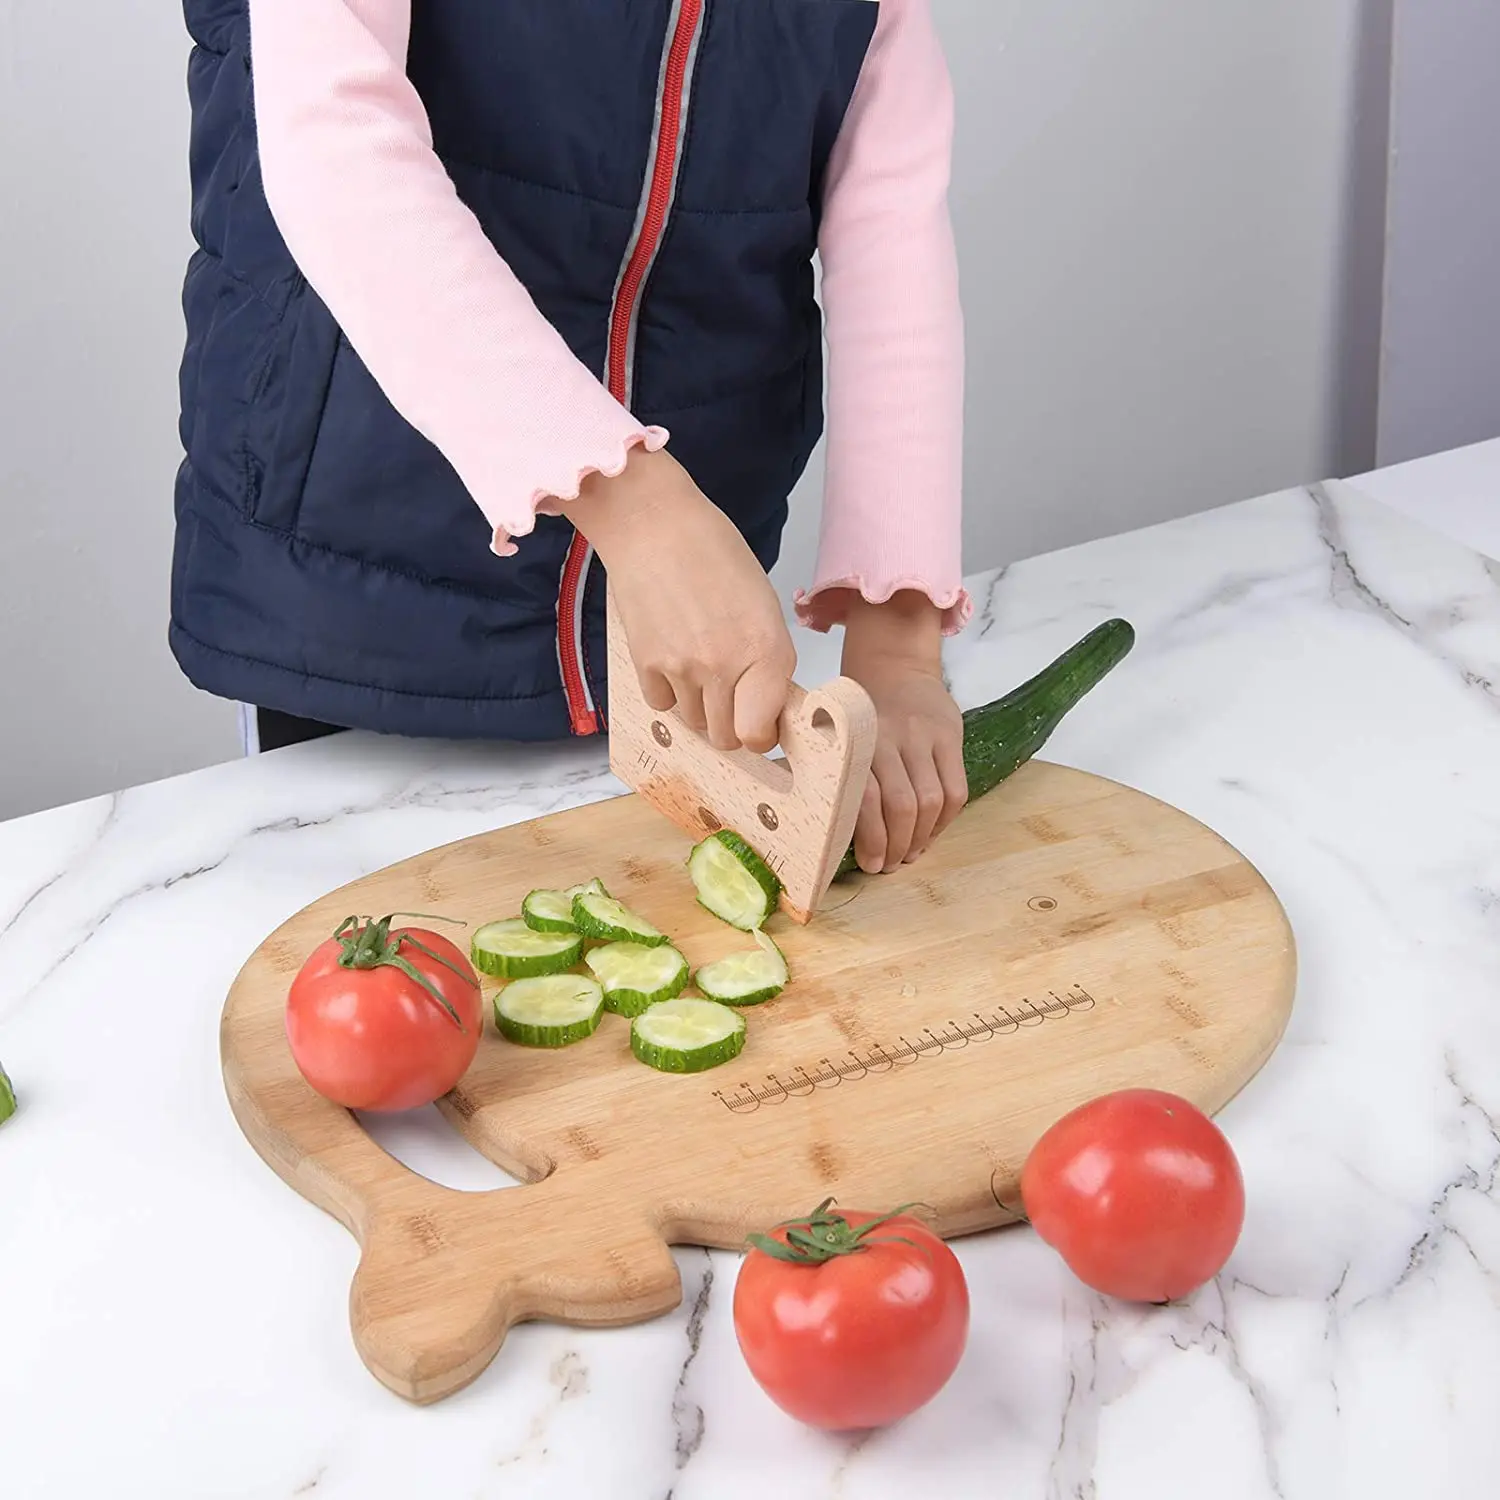 

Wooden Kids Knife For Cooking Fruit And Vegetable Cutter Cutting Children Kitchen Toys Safety Knives, Original wood color